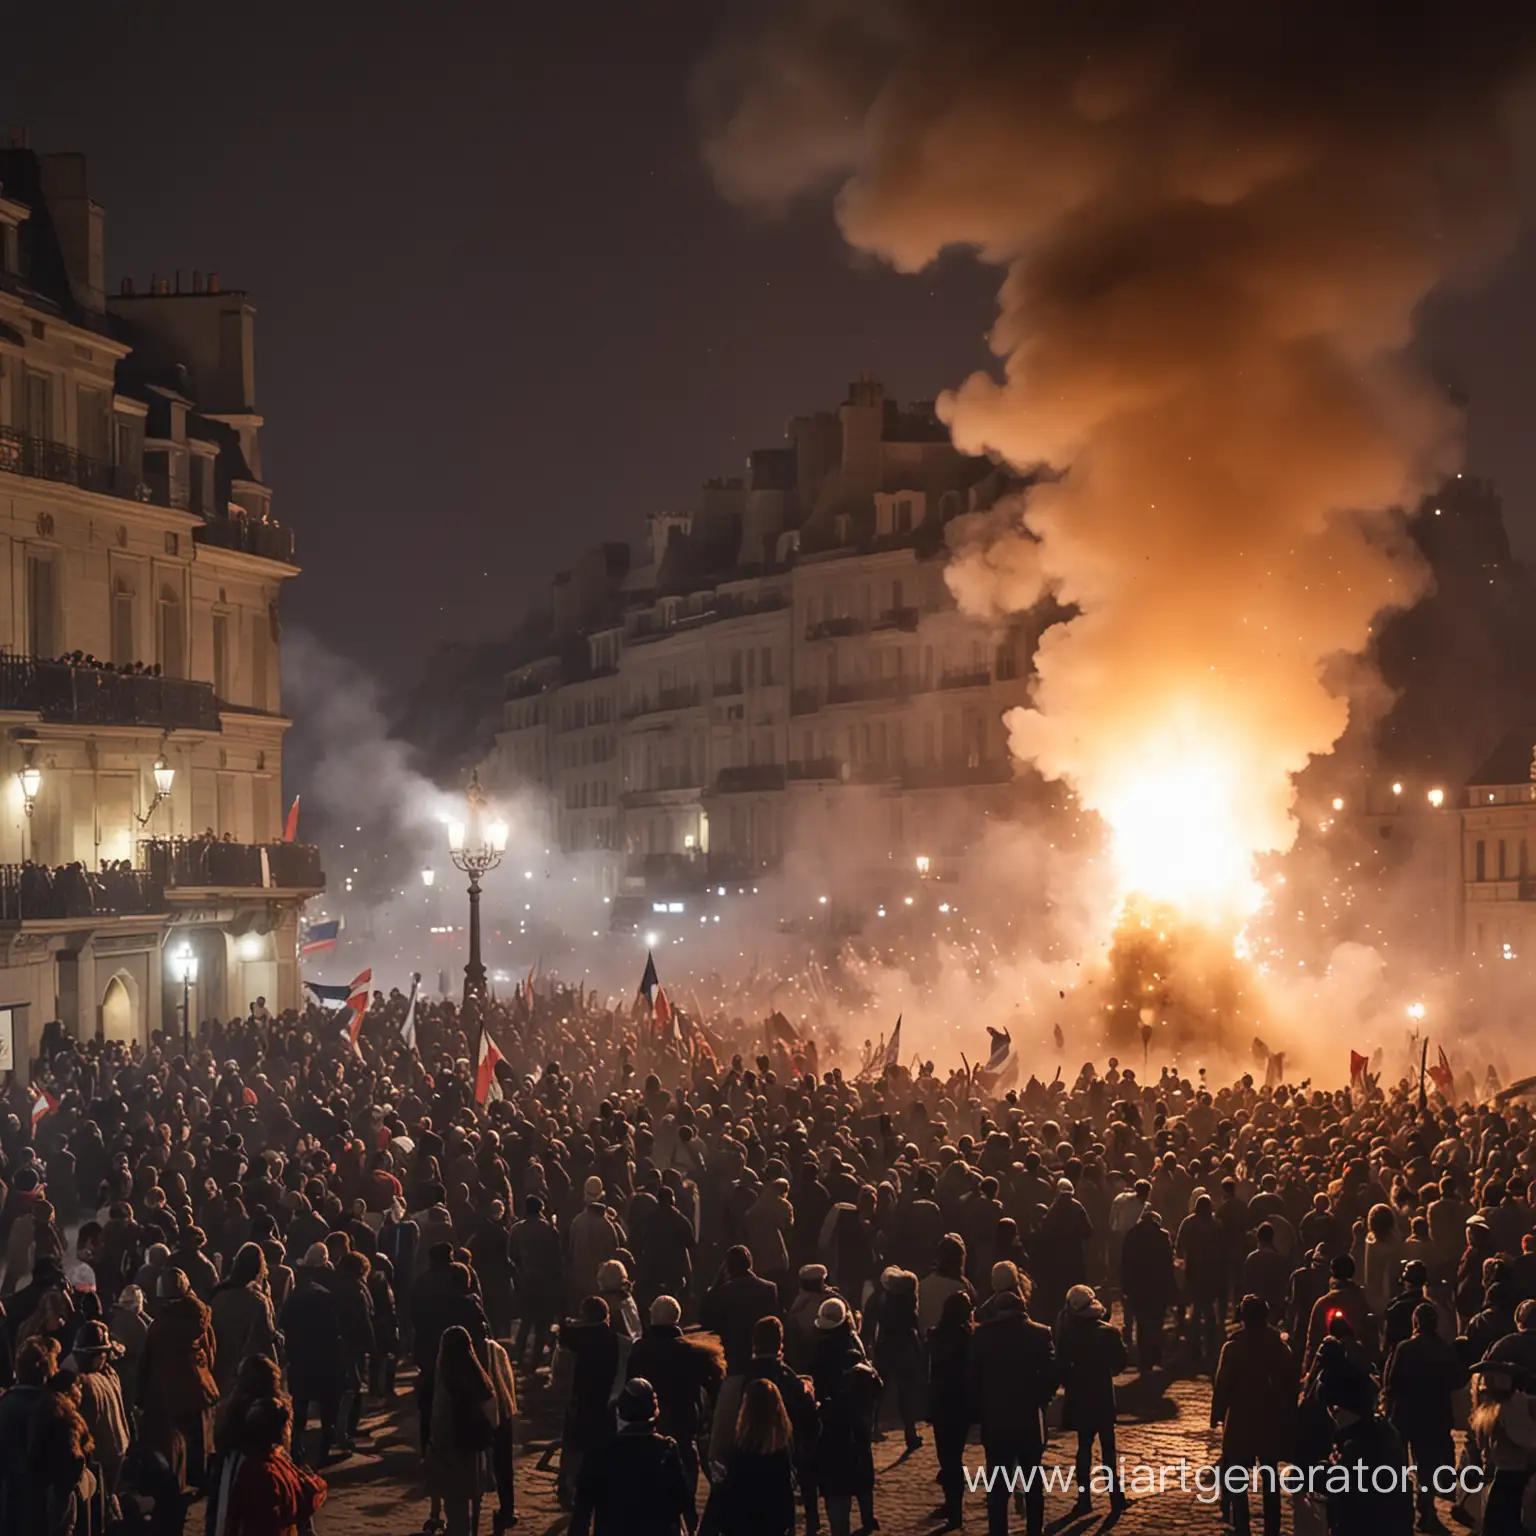 Parisian-Revolutionaries-Storming-Bastille-with-Cannons-and-Stones